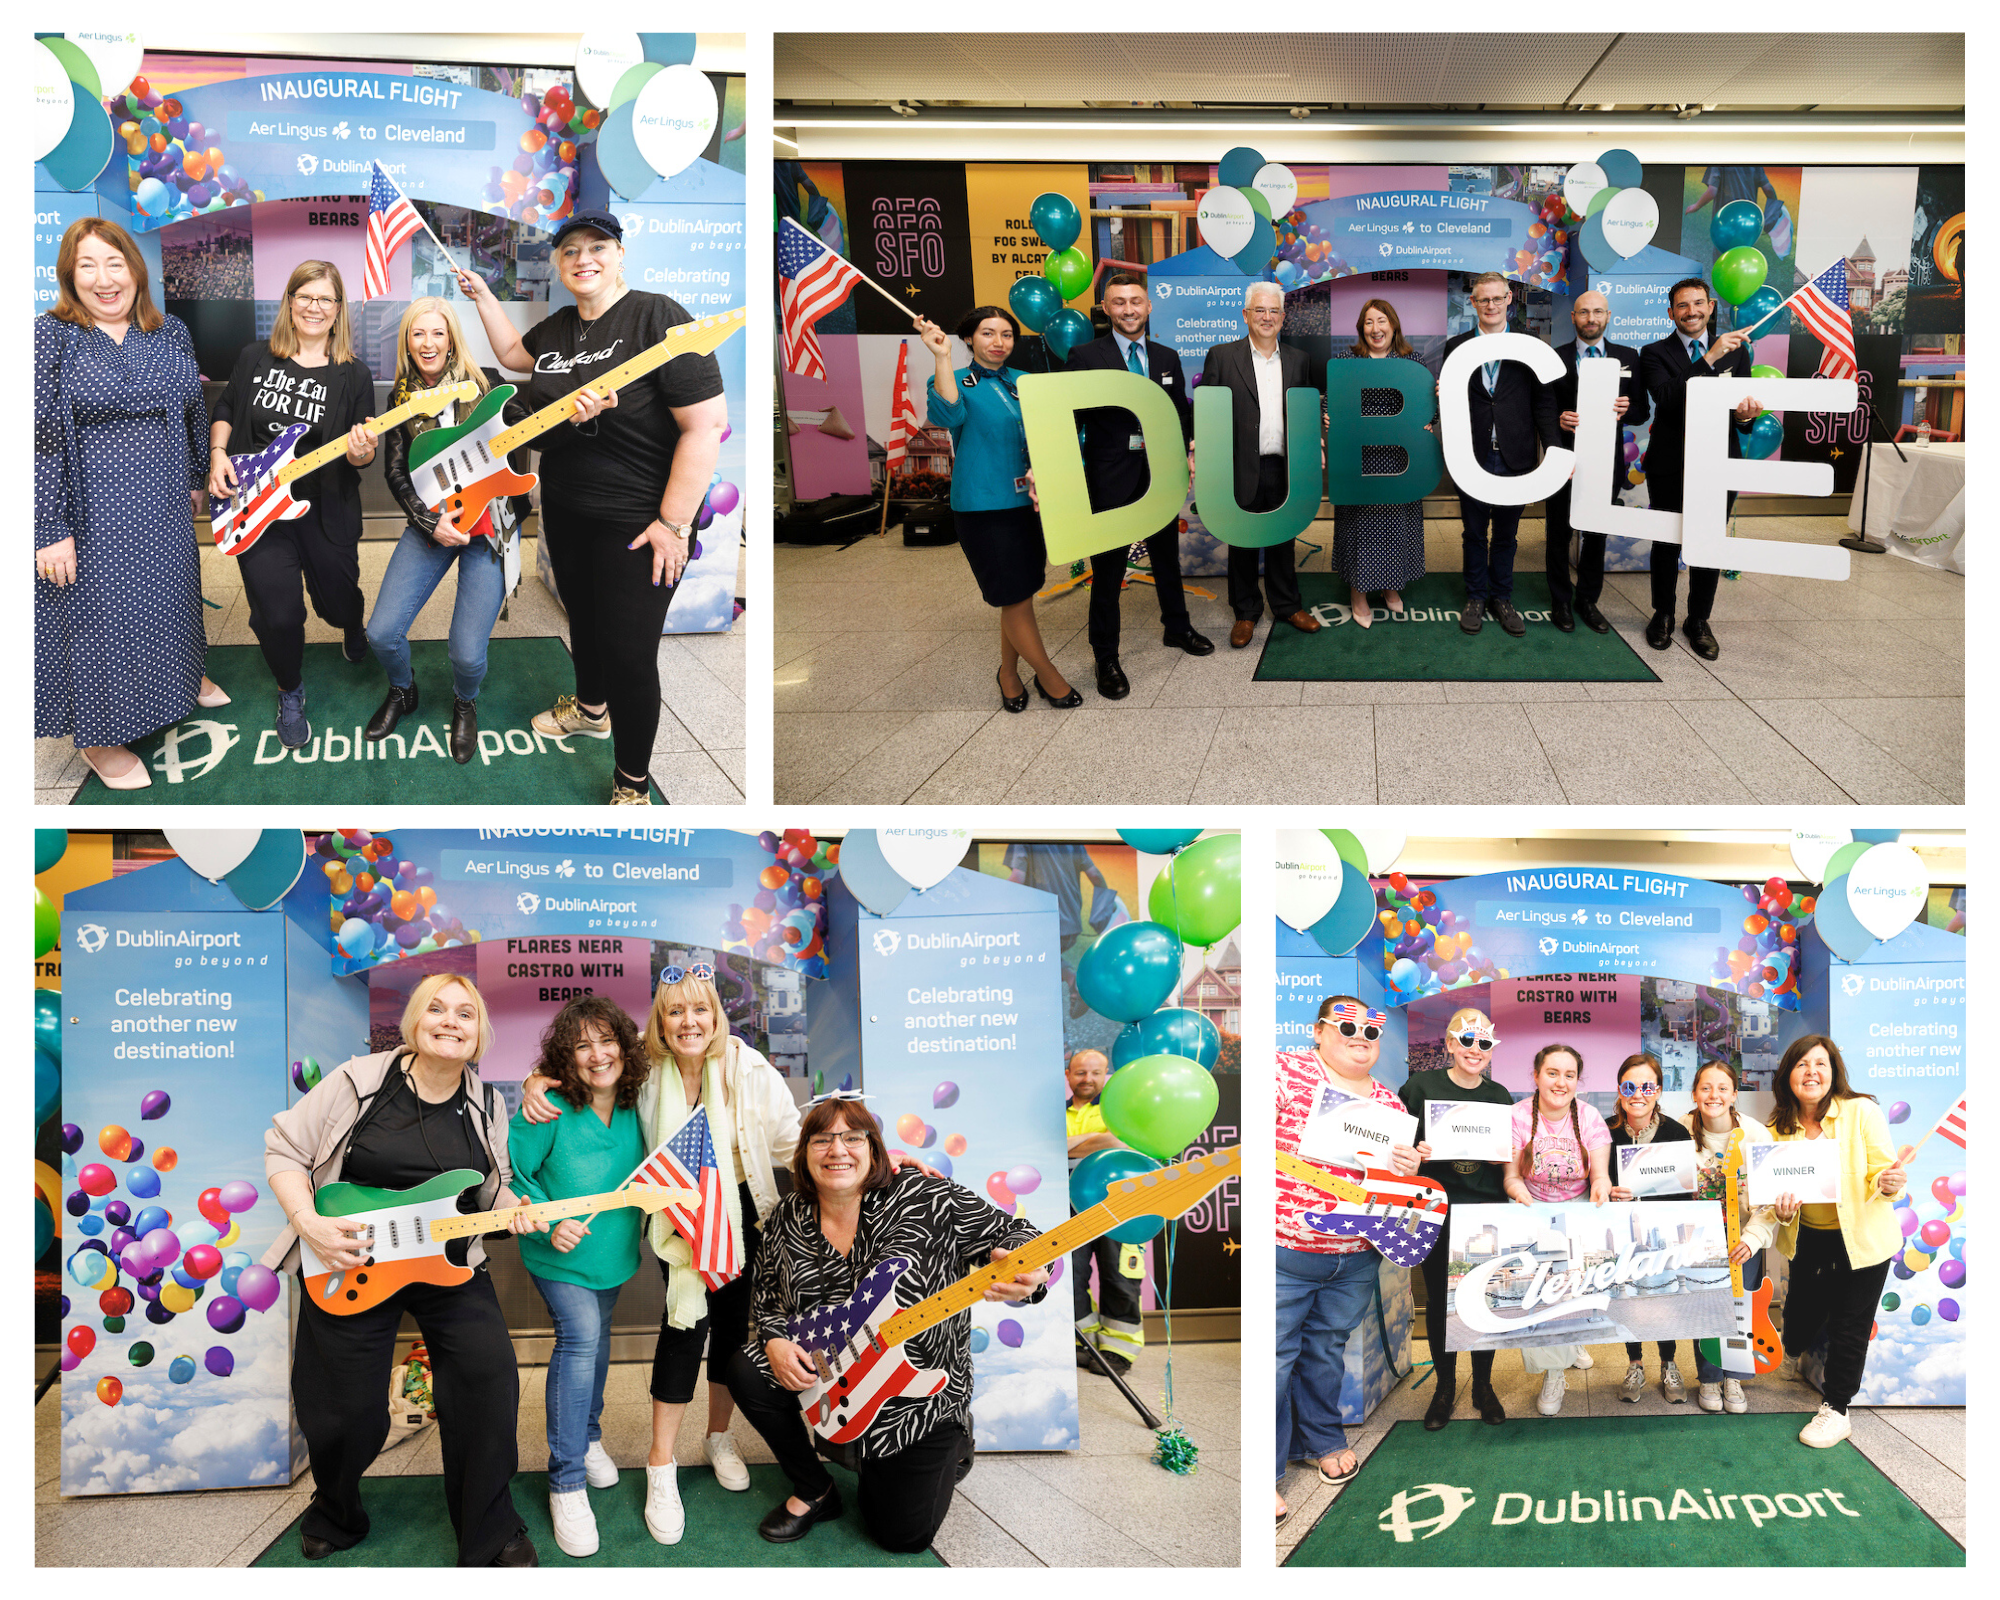 Event photos to mark the Inaugural Aer Lingus Flight to Cleveland, Ohio